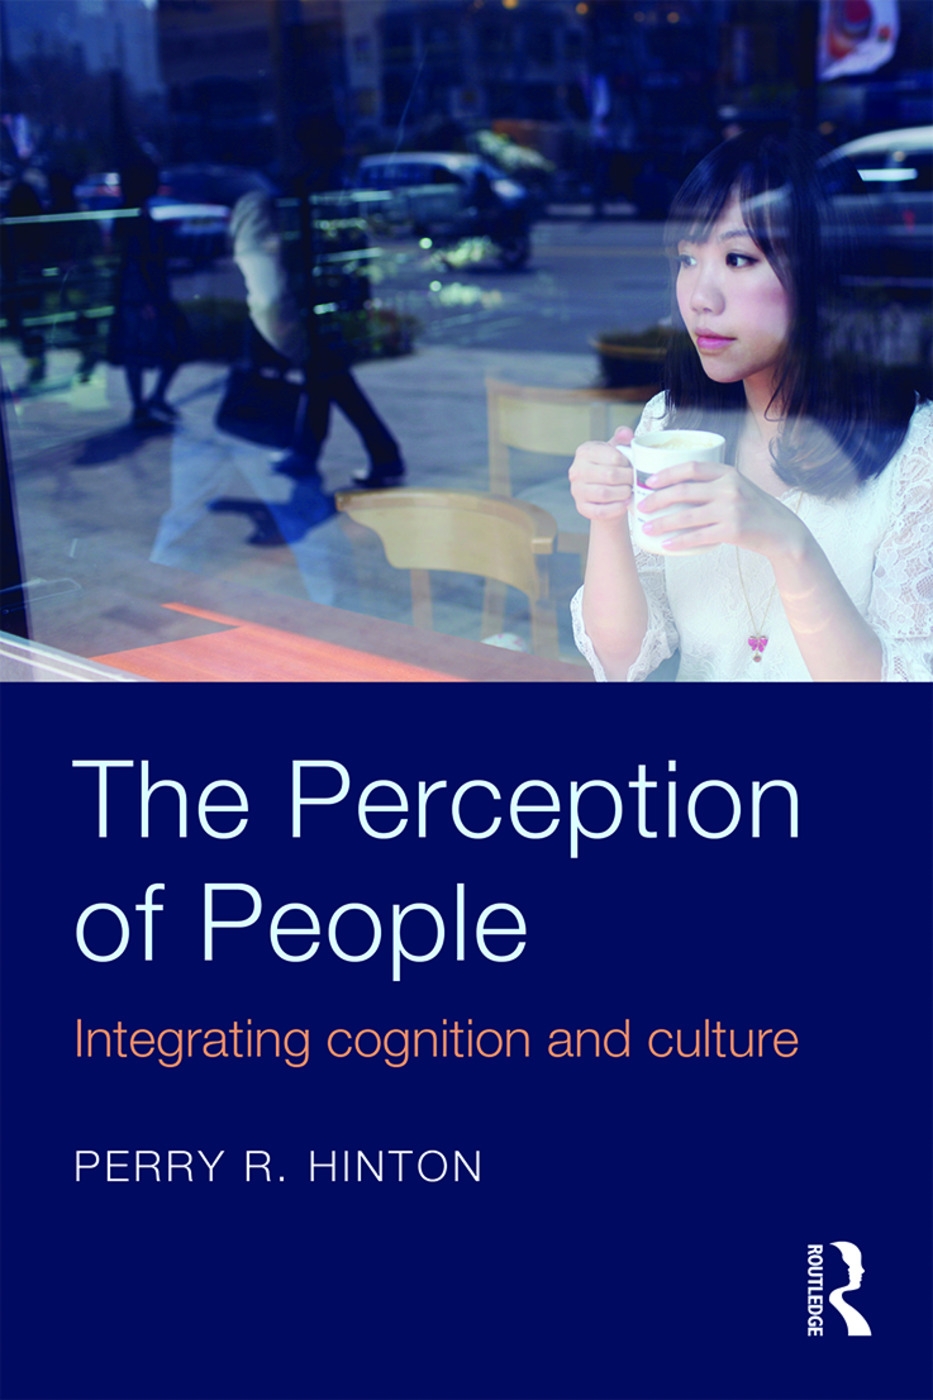 The Perception of People: Integrating Cognition and Culture